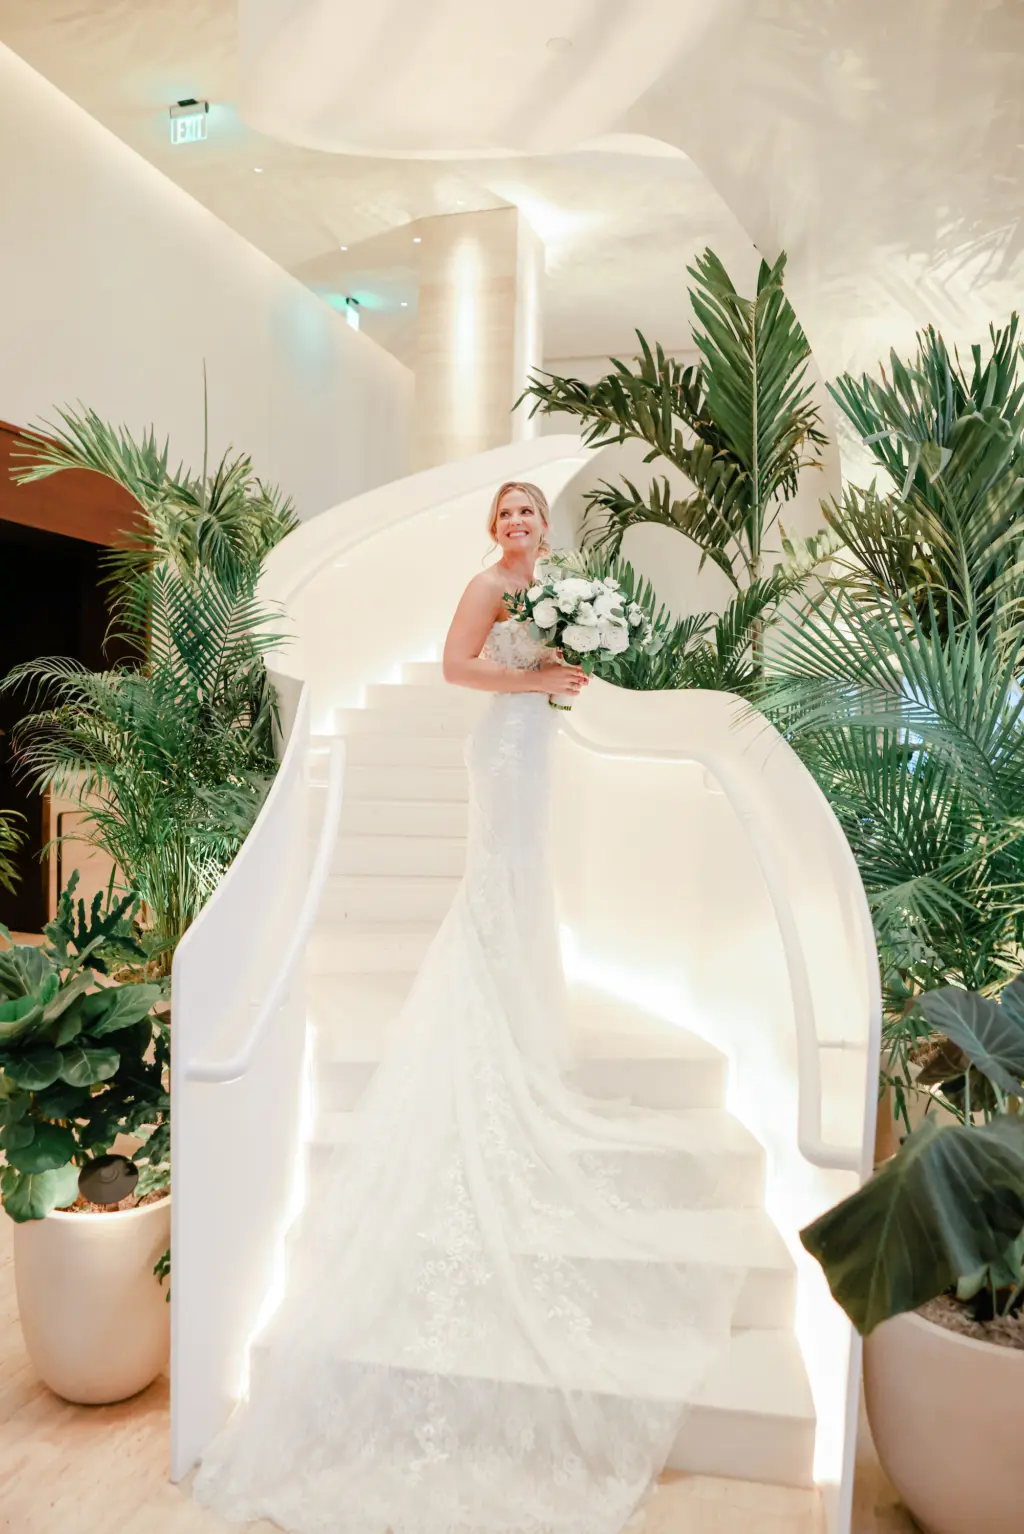 Strapless White Floral Applique Pronovias Mermaid Wedding Dress with Cathedral Length Train | Downtown Event Venue The Edition Hotel Tampa Water Street Lobby Staircase | Bridal Portrait Inspiration